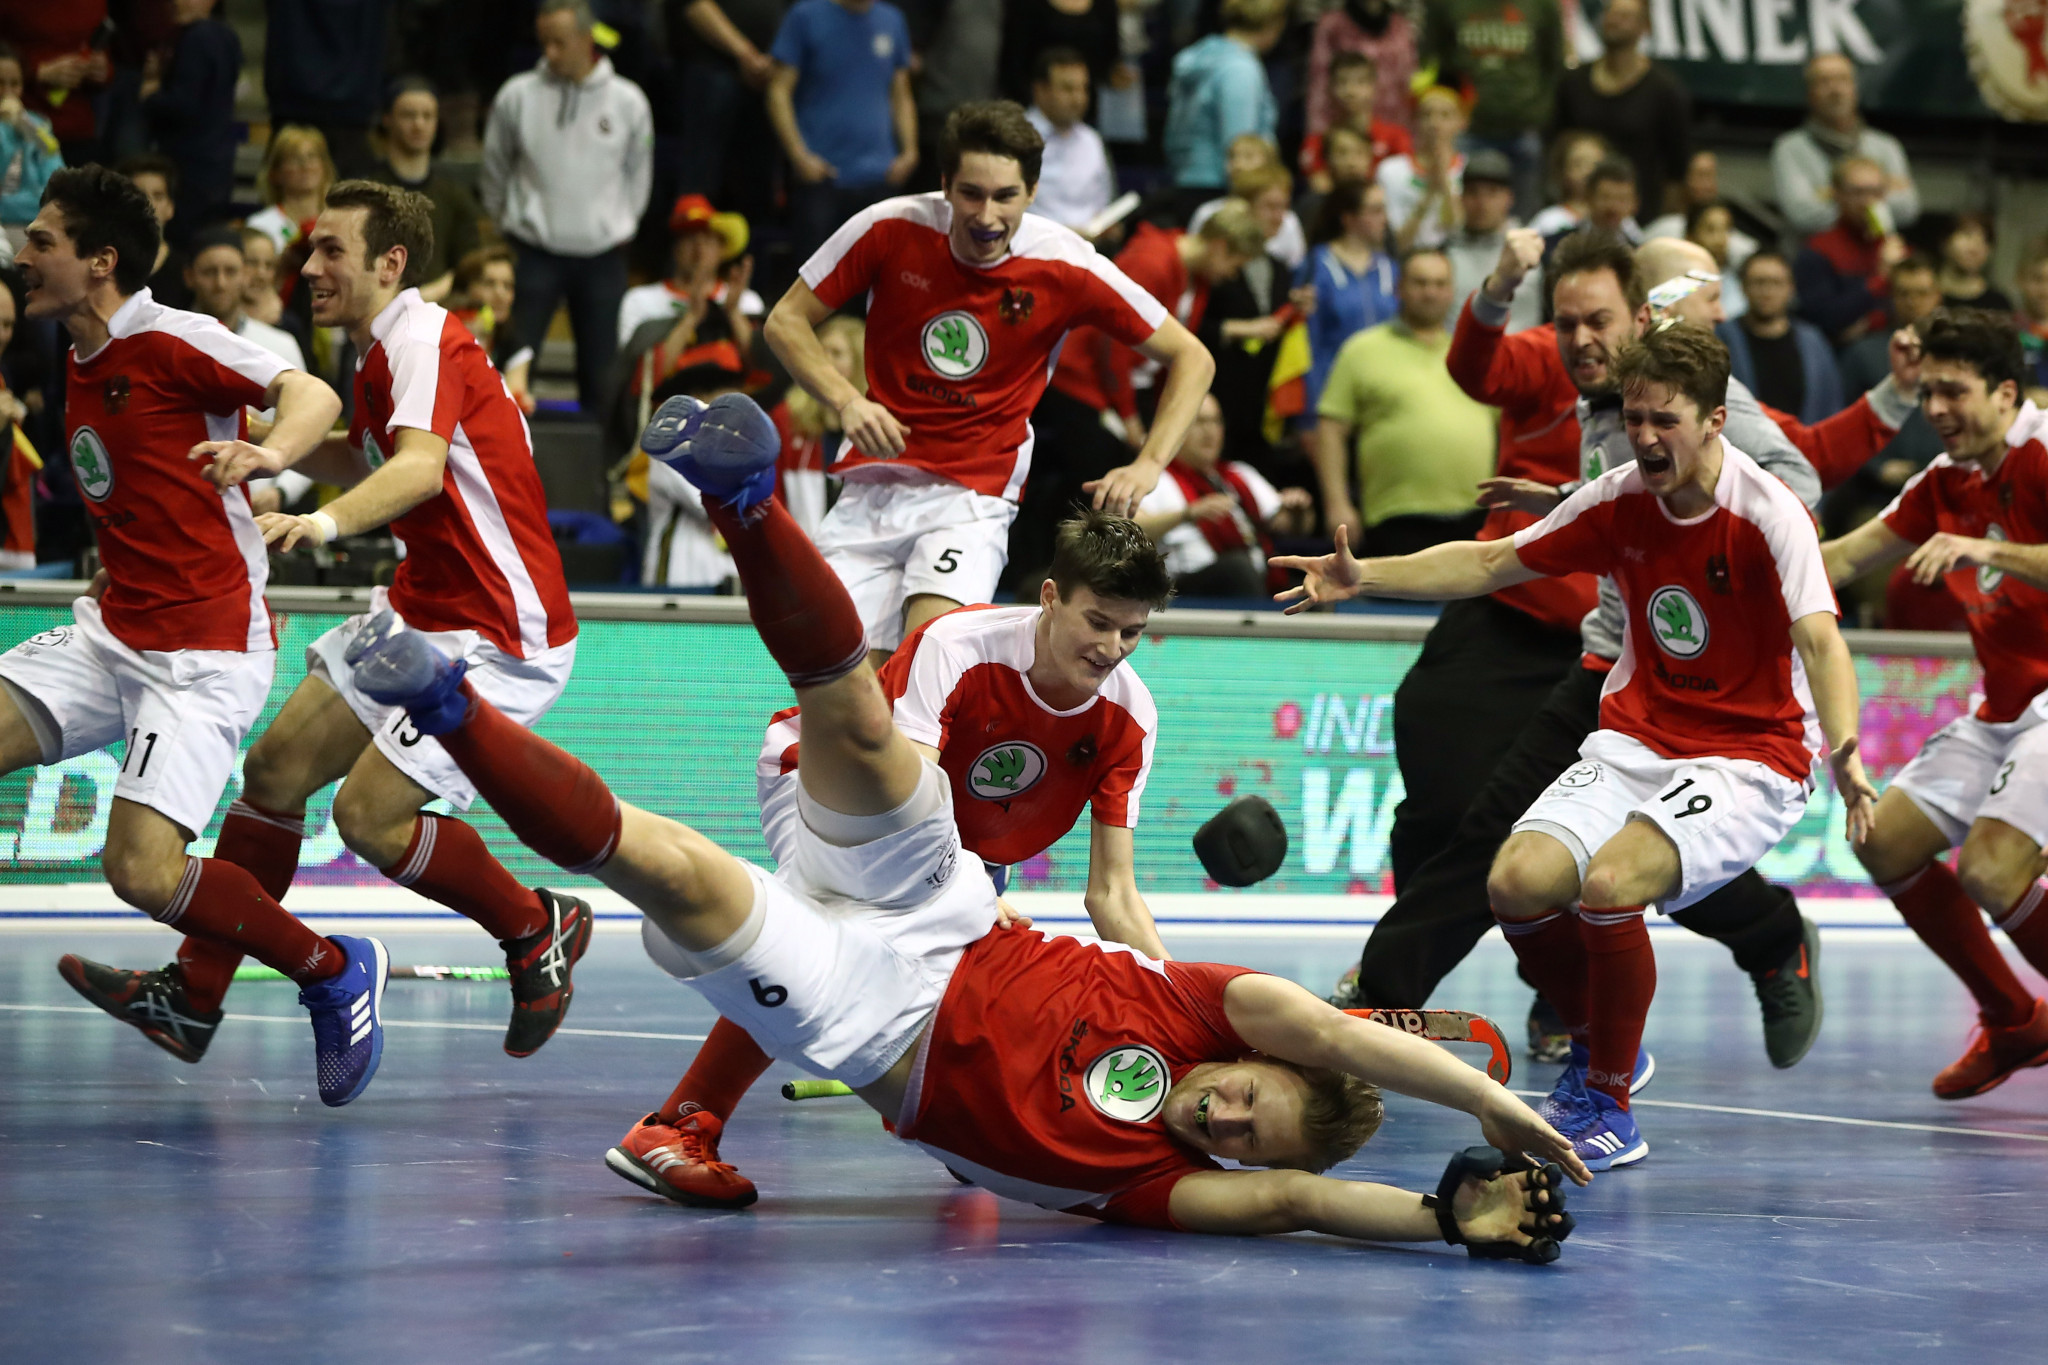  Record crowds see German women and Austrian men claim Indoor Hockey World Cup wins